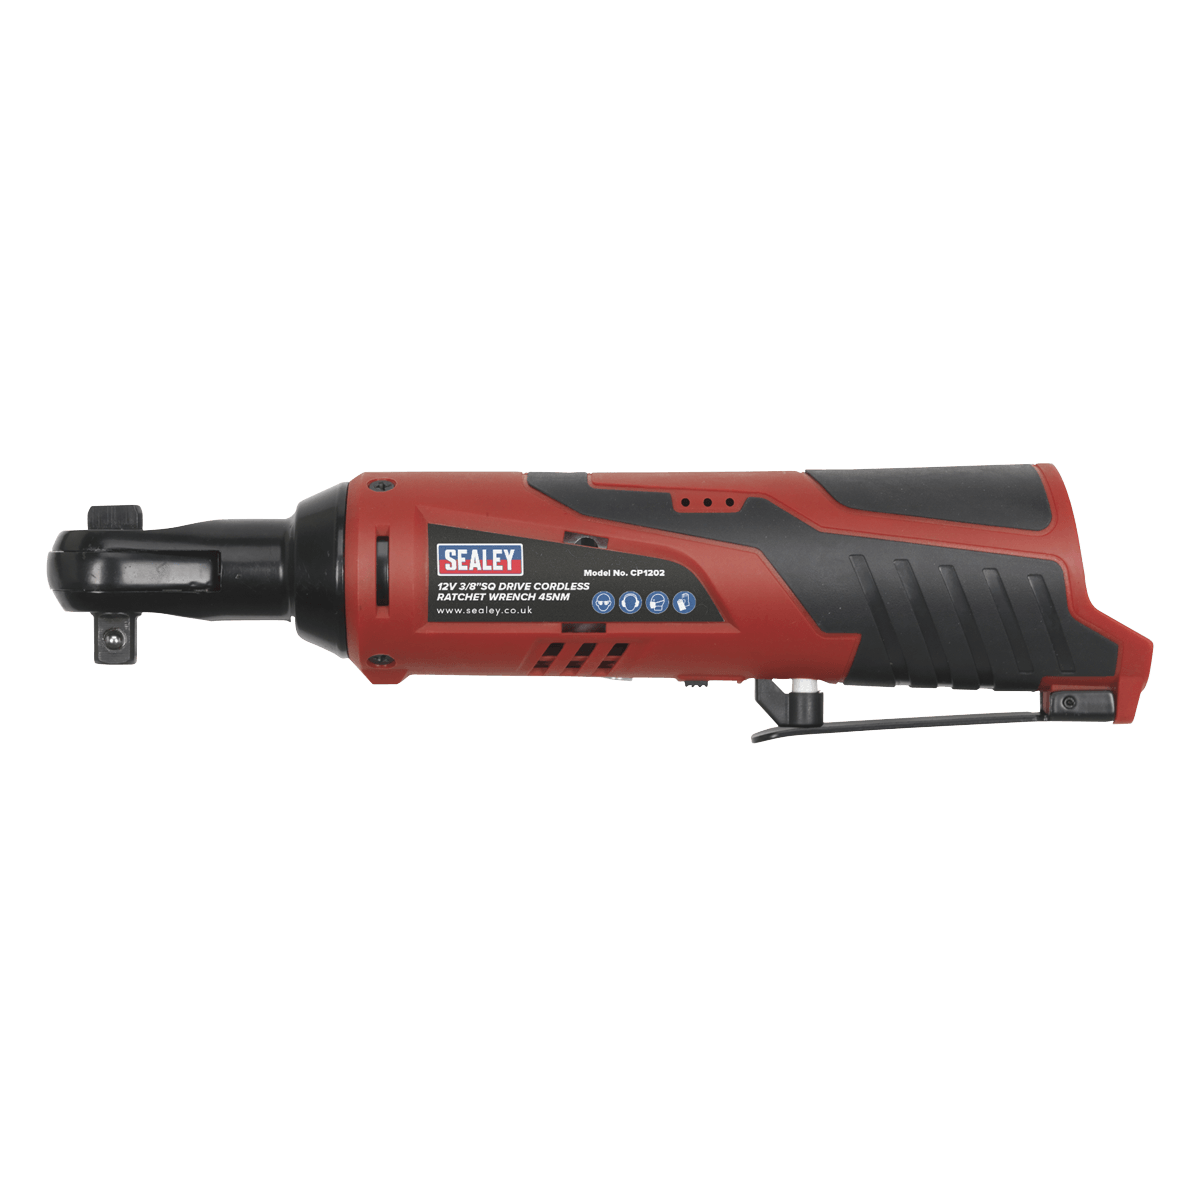 Sealey Cordless Ratchet Wrench 3/8"Sq Drive 12V SV12 Series - Body Only CP1202 - Tools 2U Direct SW